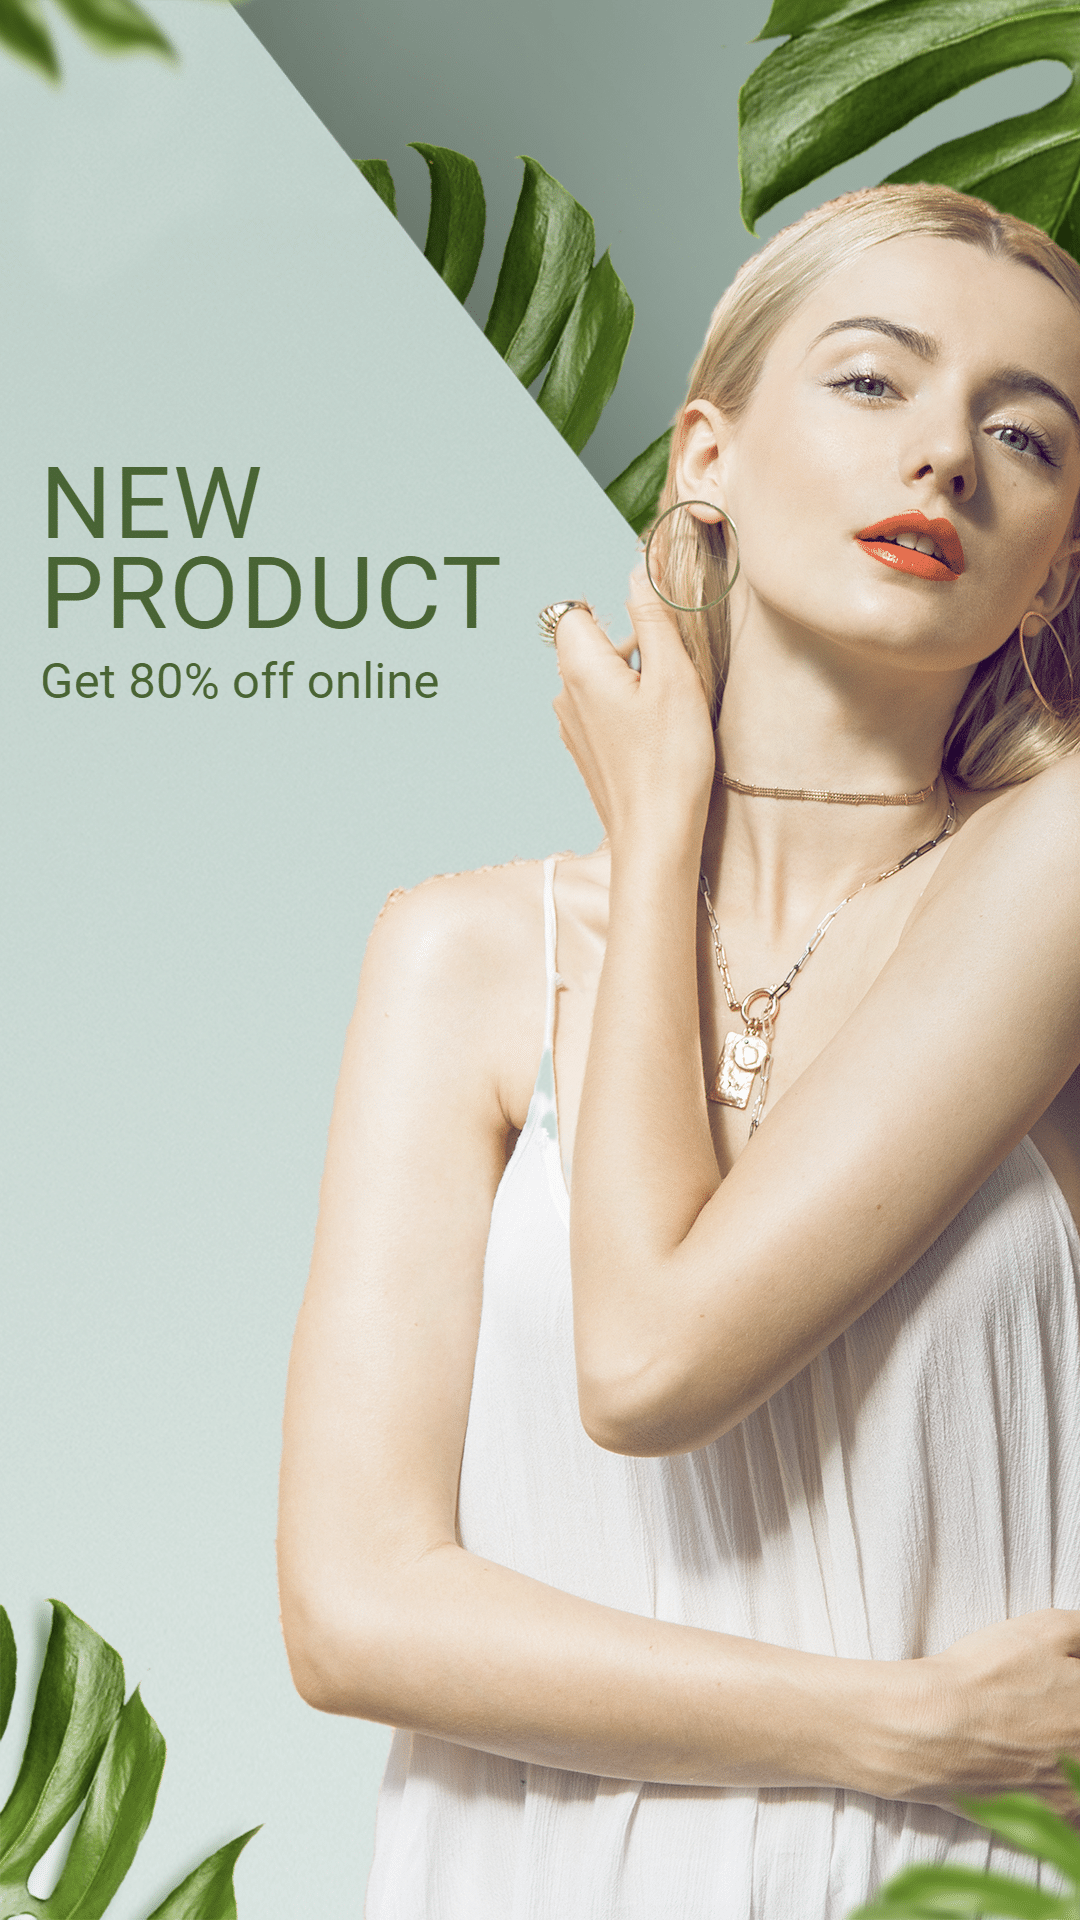 Simple Accessories New Arrival Promotion Ecommerce Story预览效果